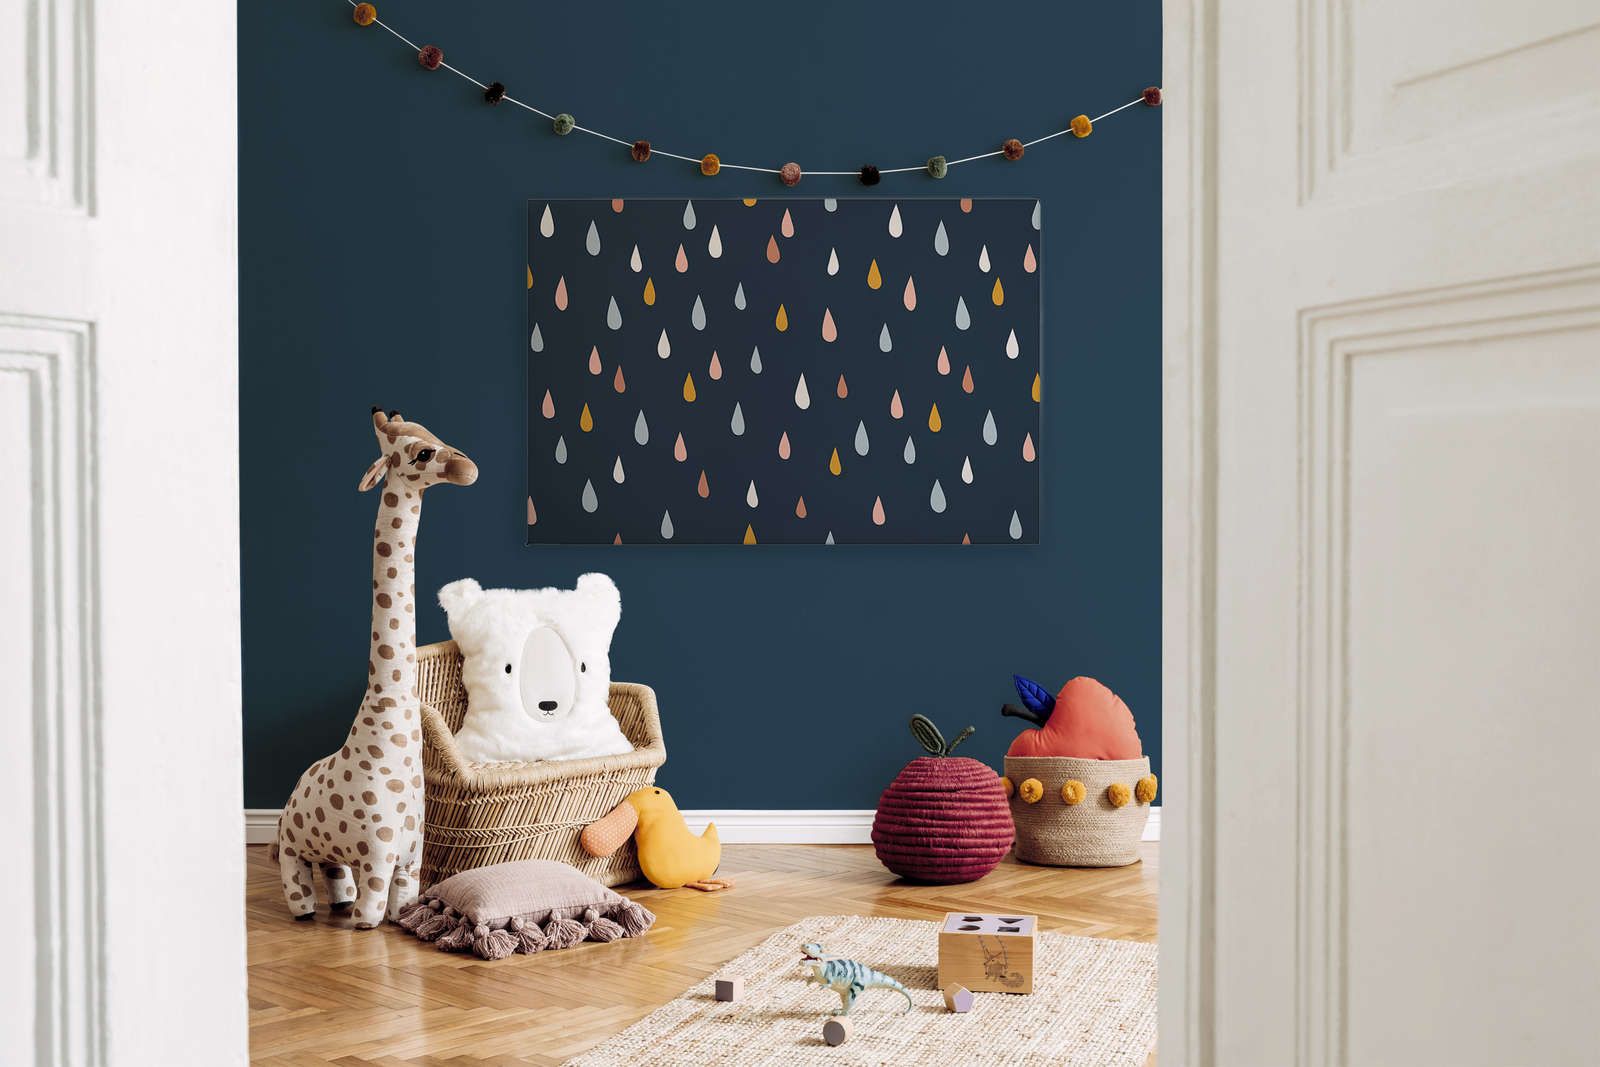             Canvas for children's room with colourful drops - 120 cm x 80 cm
        